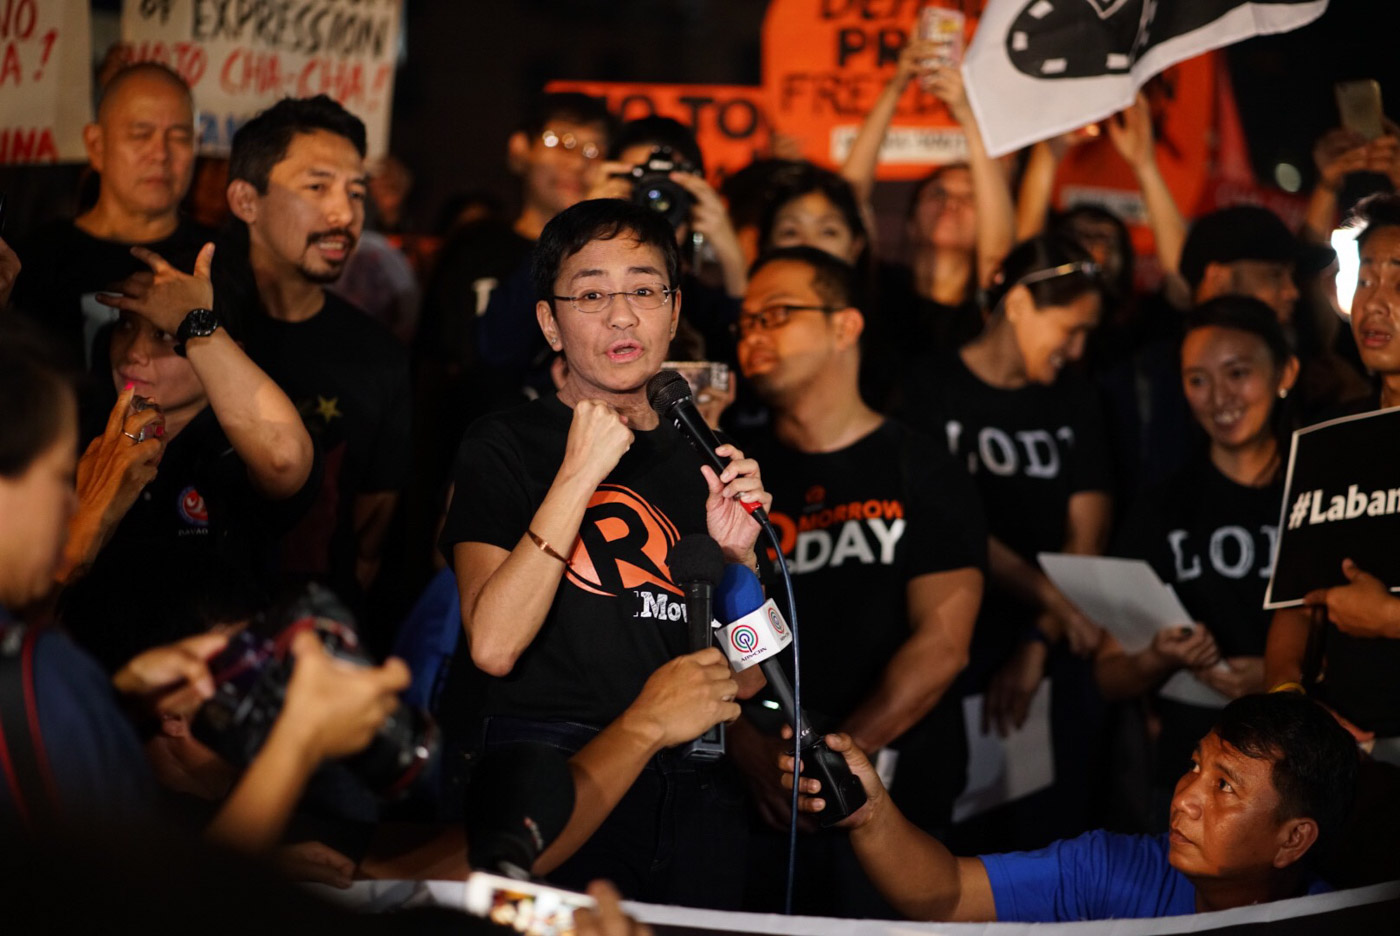 PRESS FREEDOM. Rappler CEO Maria Ressa joins a Black Friday for Press Freedom rally in Quezon City on January 19, 2018, after the Securities and Exchange Commission revoked Rappler's license. Photo by Martin San Diego/Rappler  